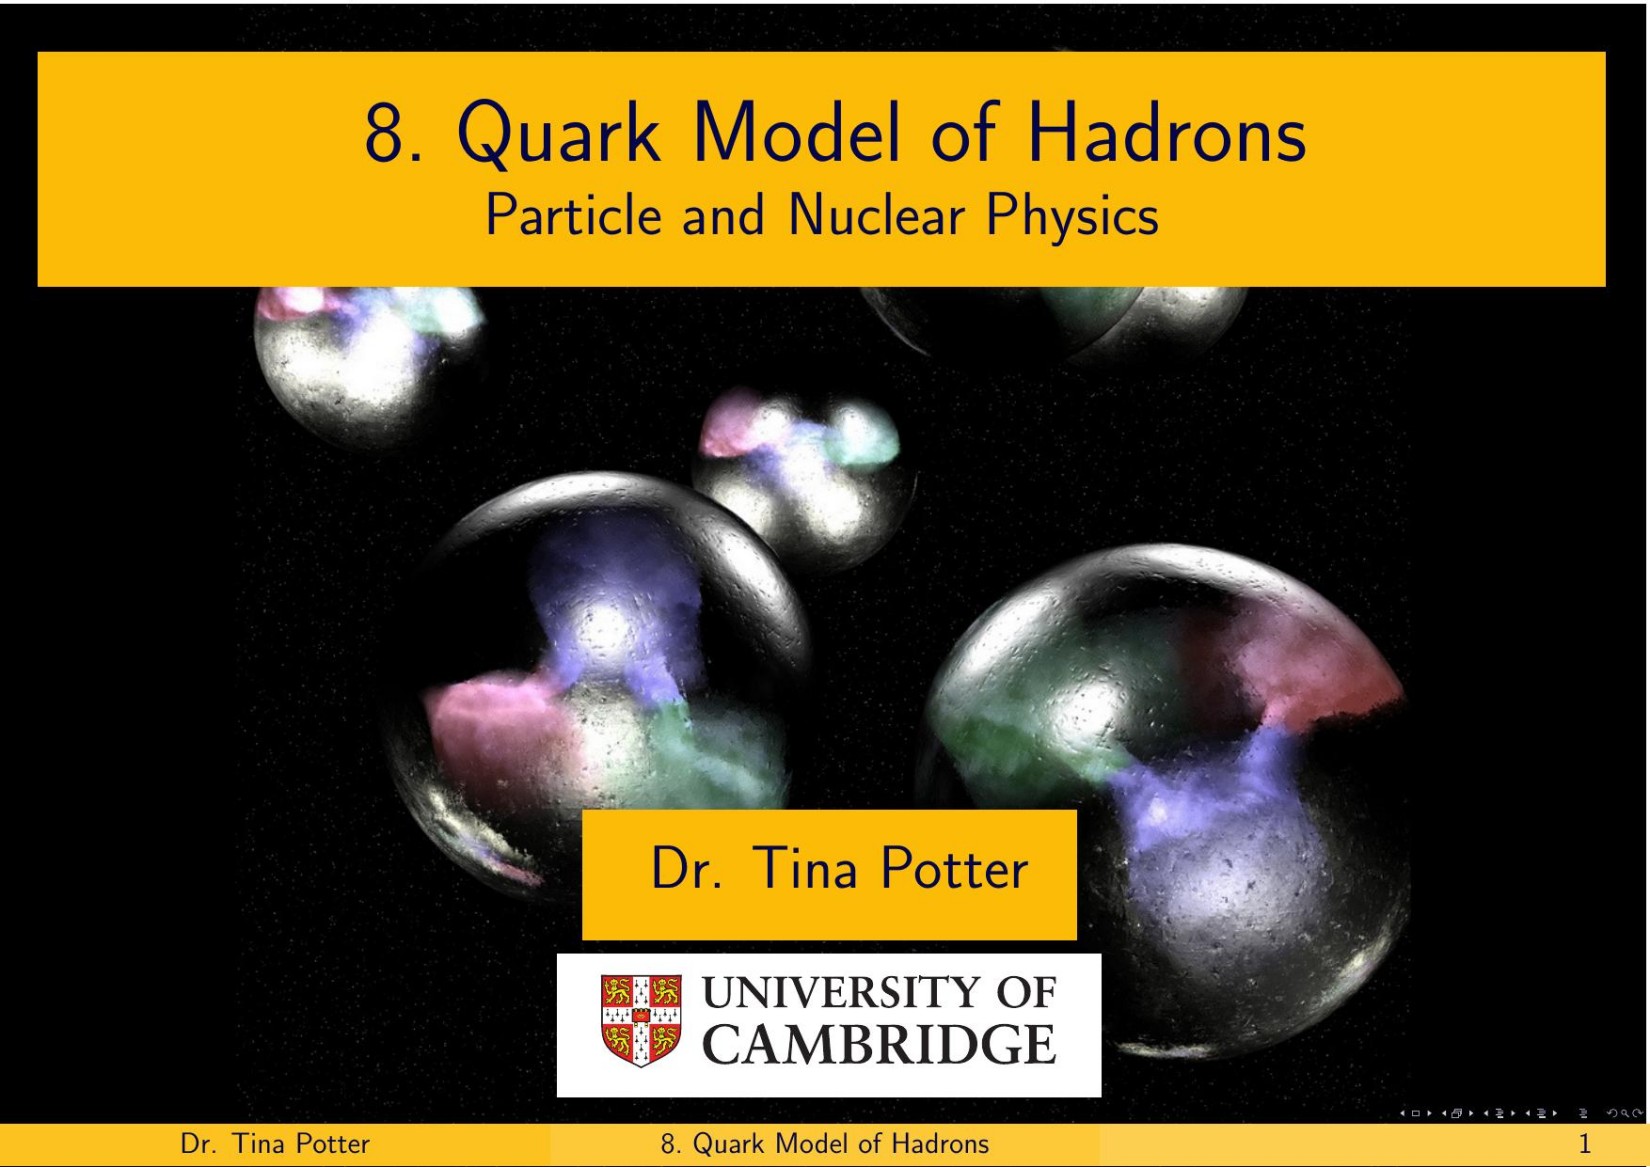 8. Quark Model of Hadrons - Particle and Nuclear Physics